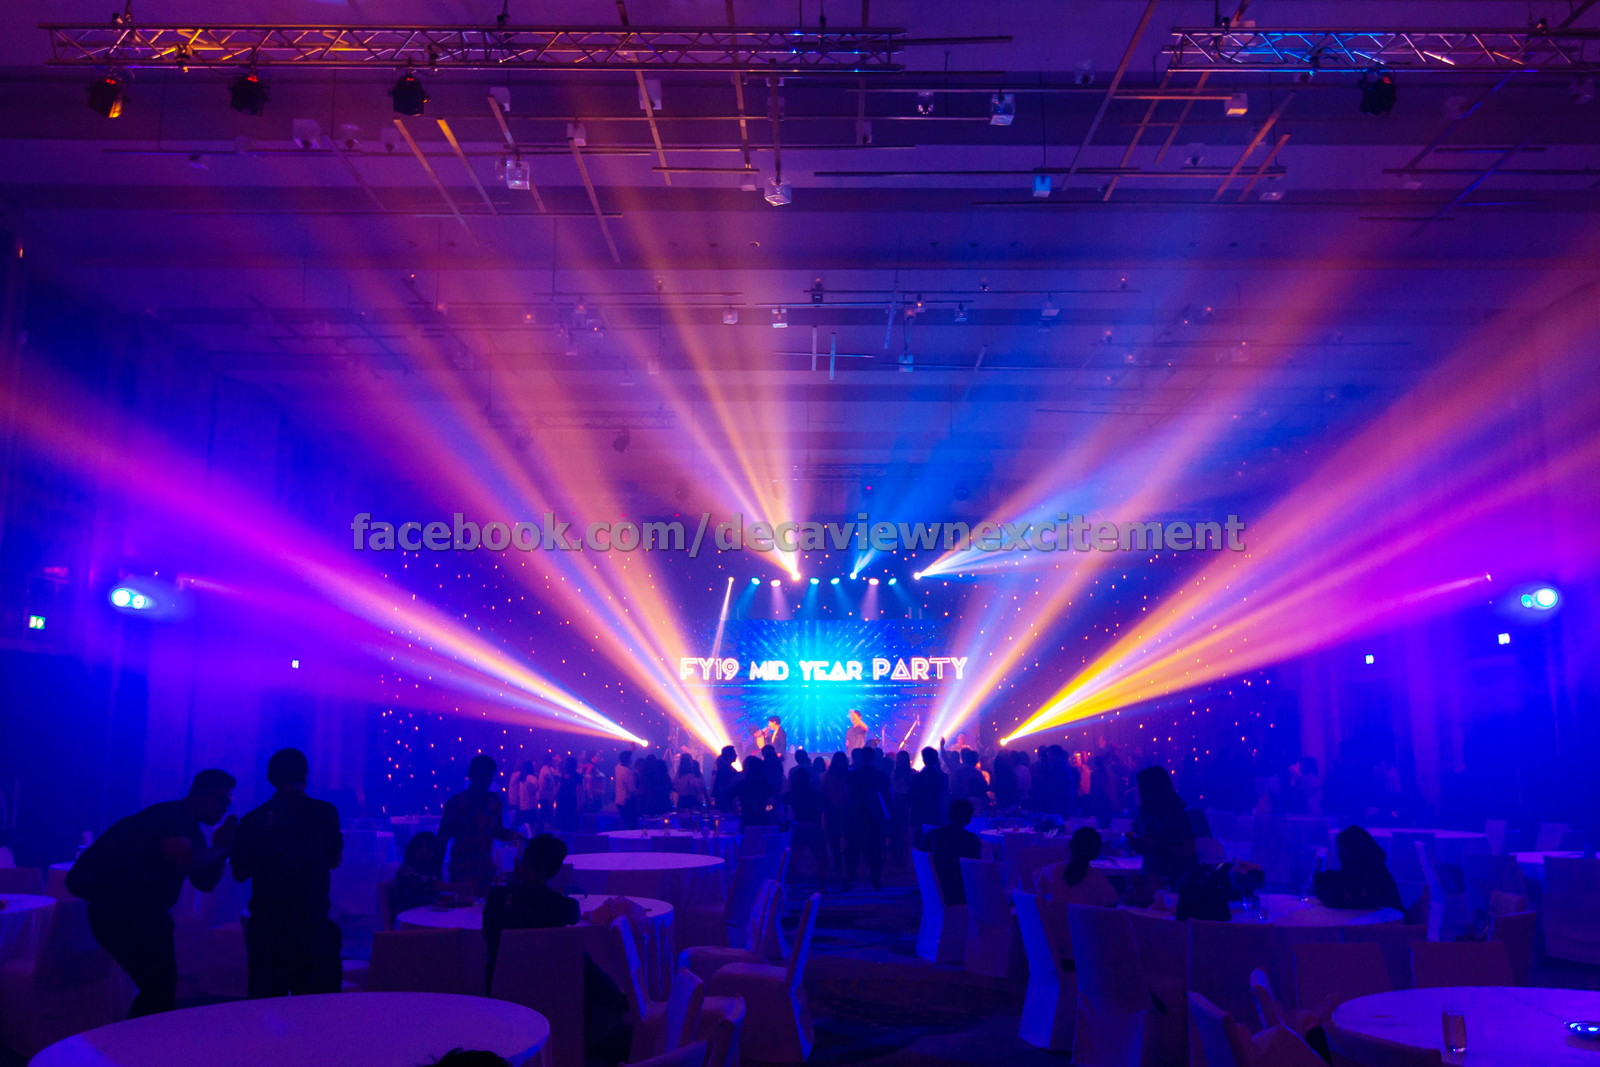 Nexcitement and DecaView Event Organizer manage an annual mid-year grand party for a major Japanese company